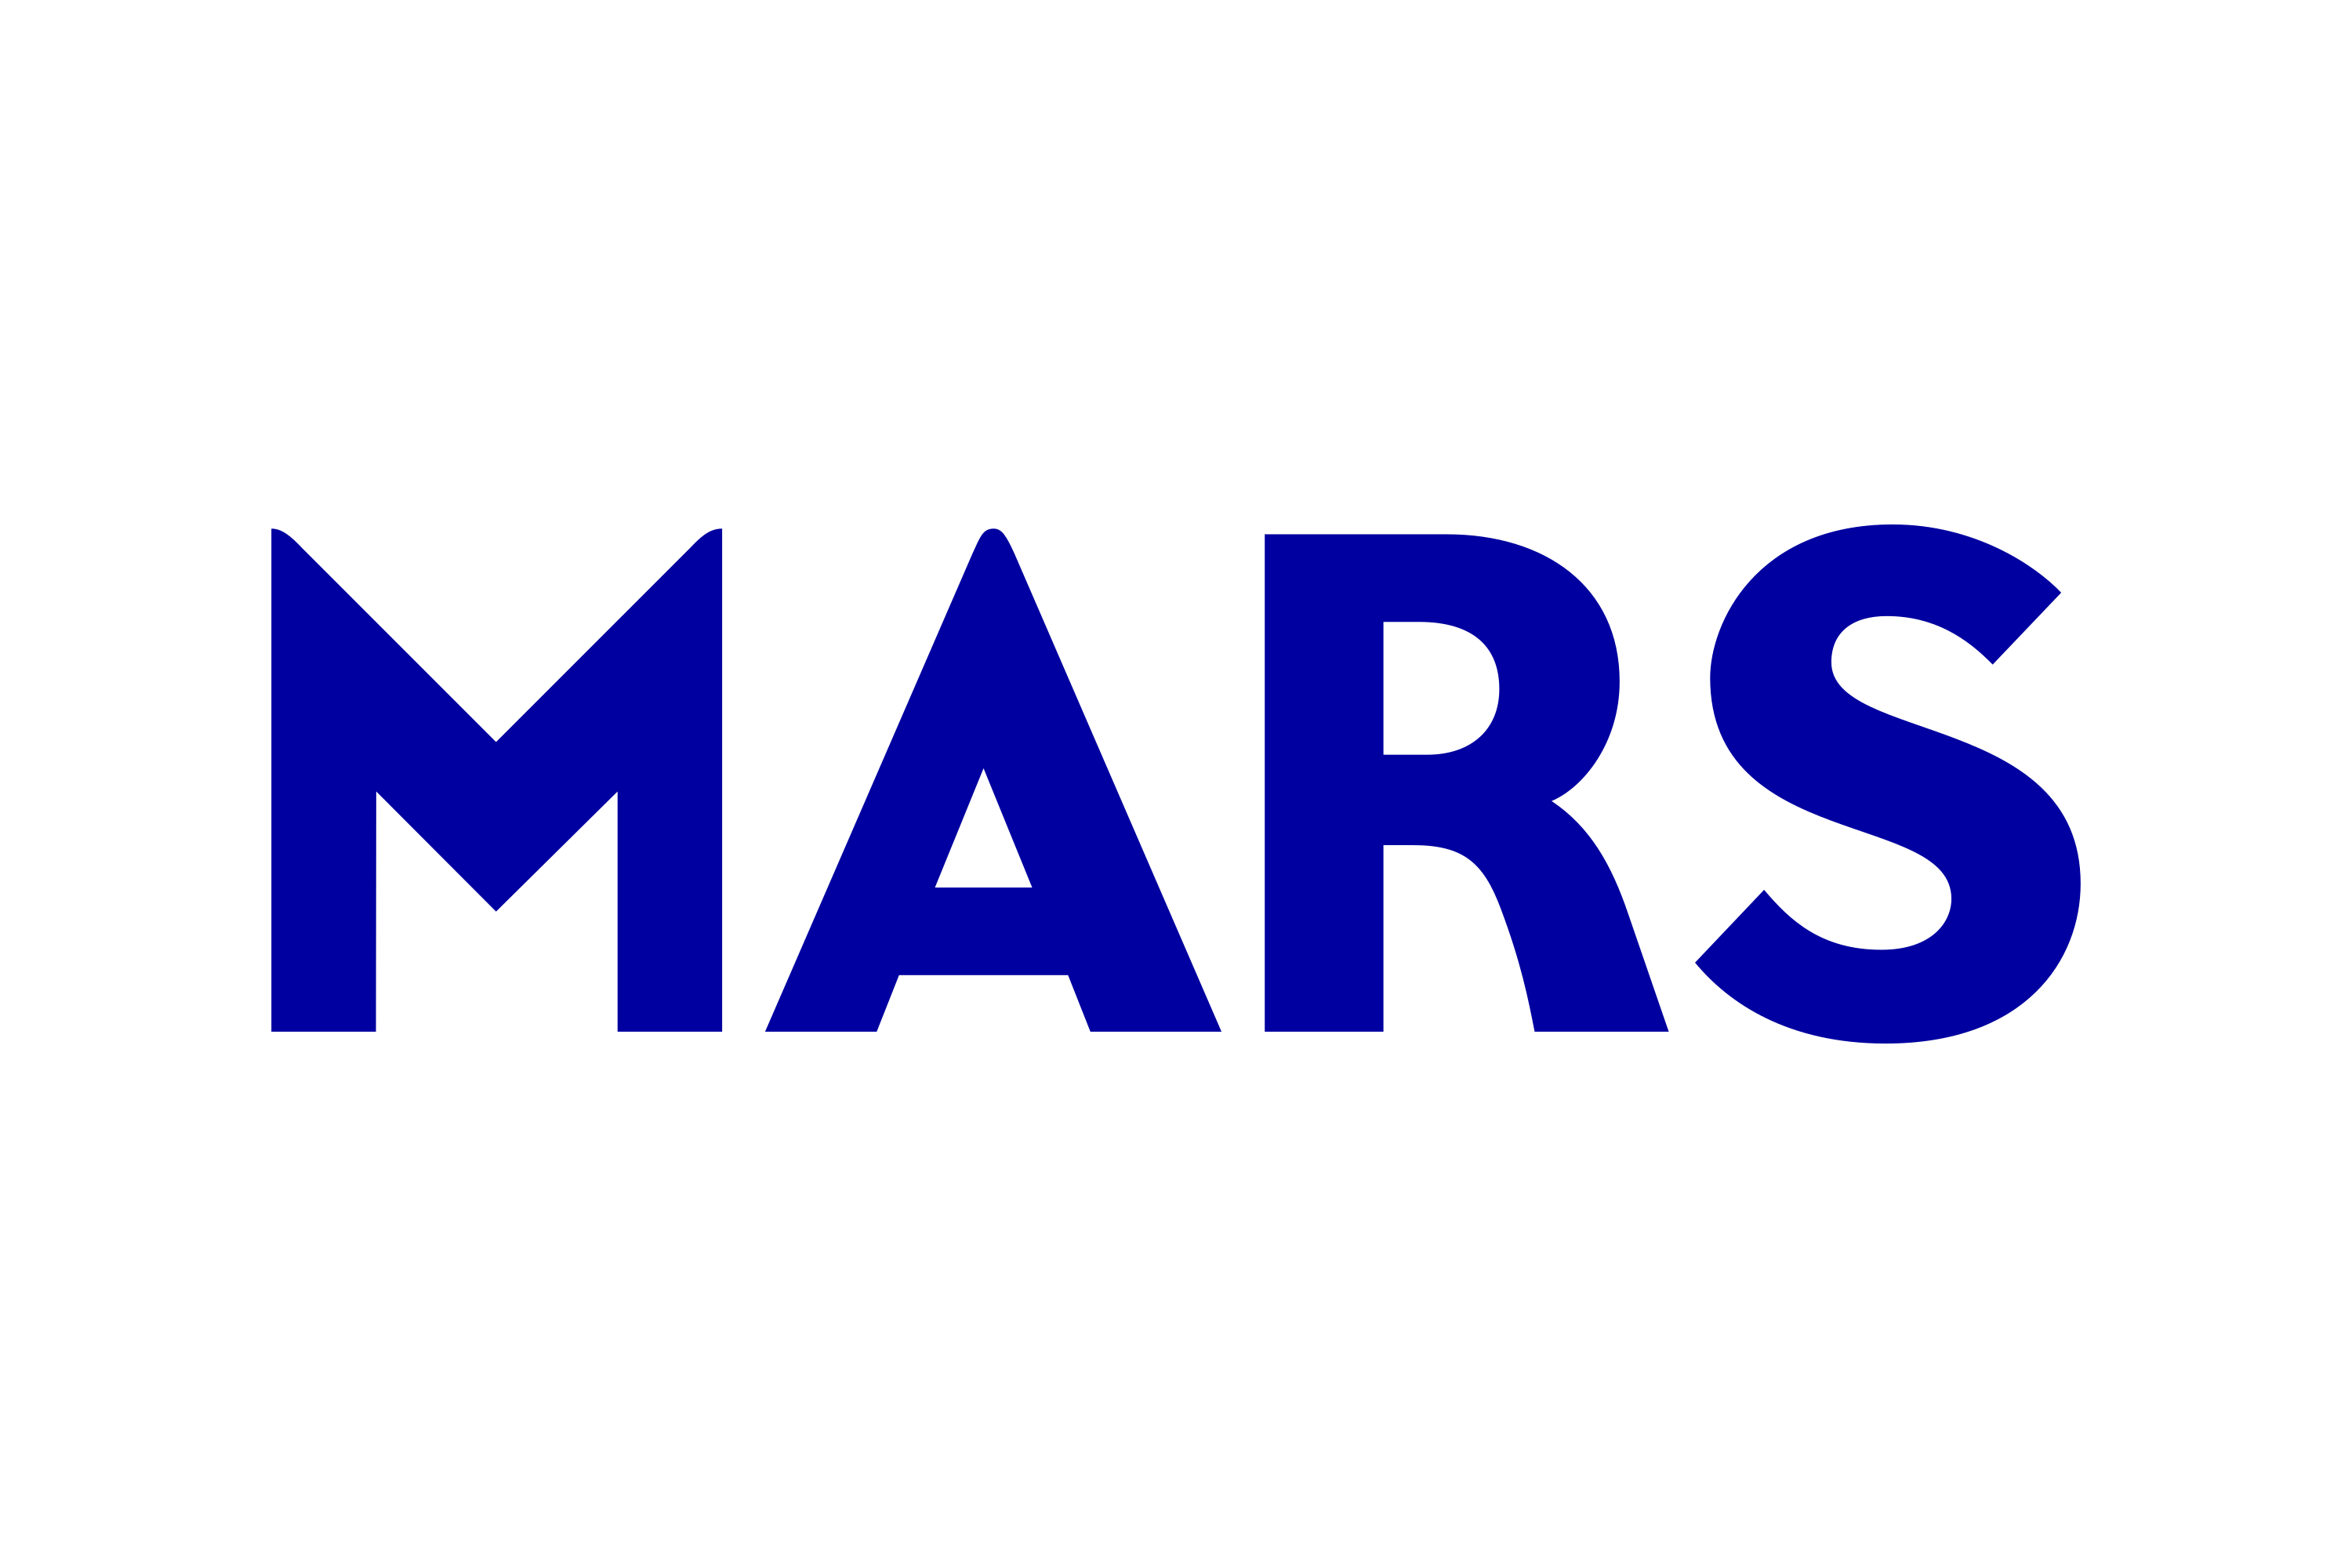 Download Mars, Incorporated Logo in SVG Vector or PNG File Format